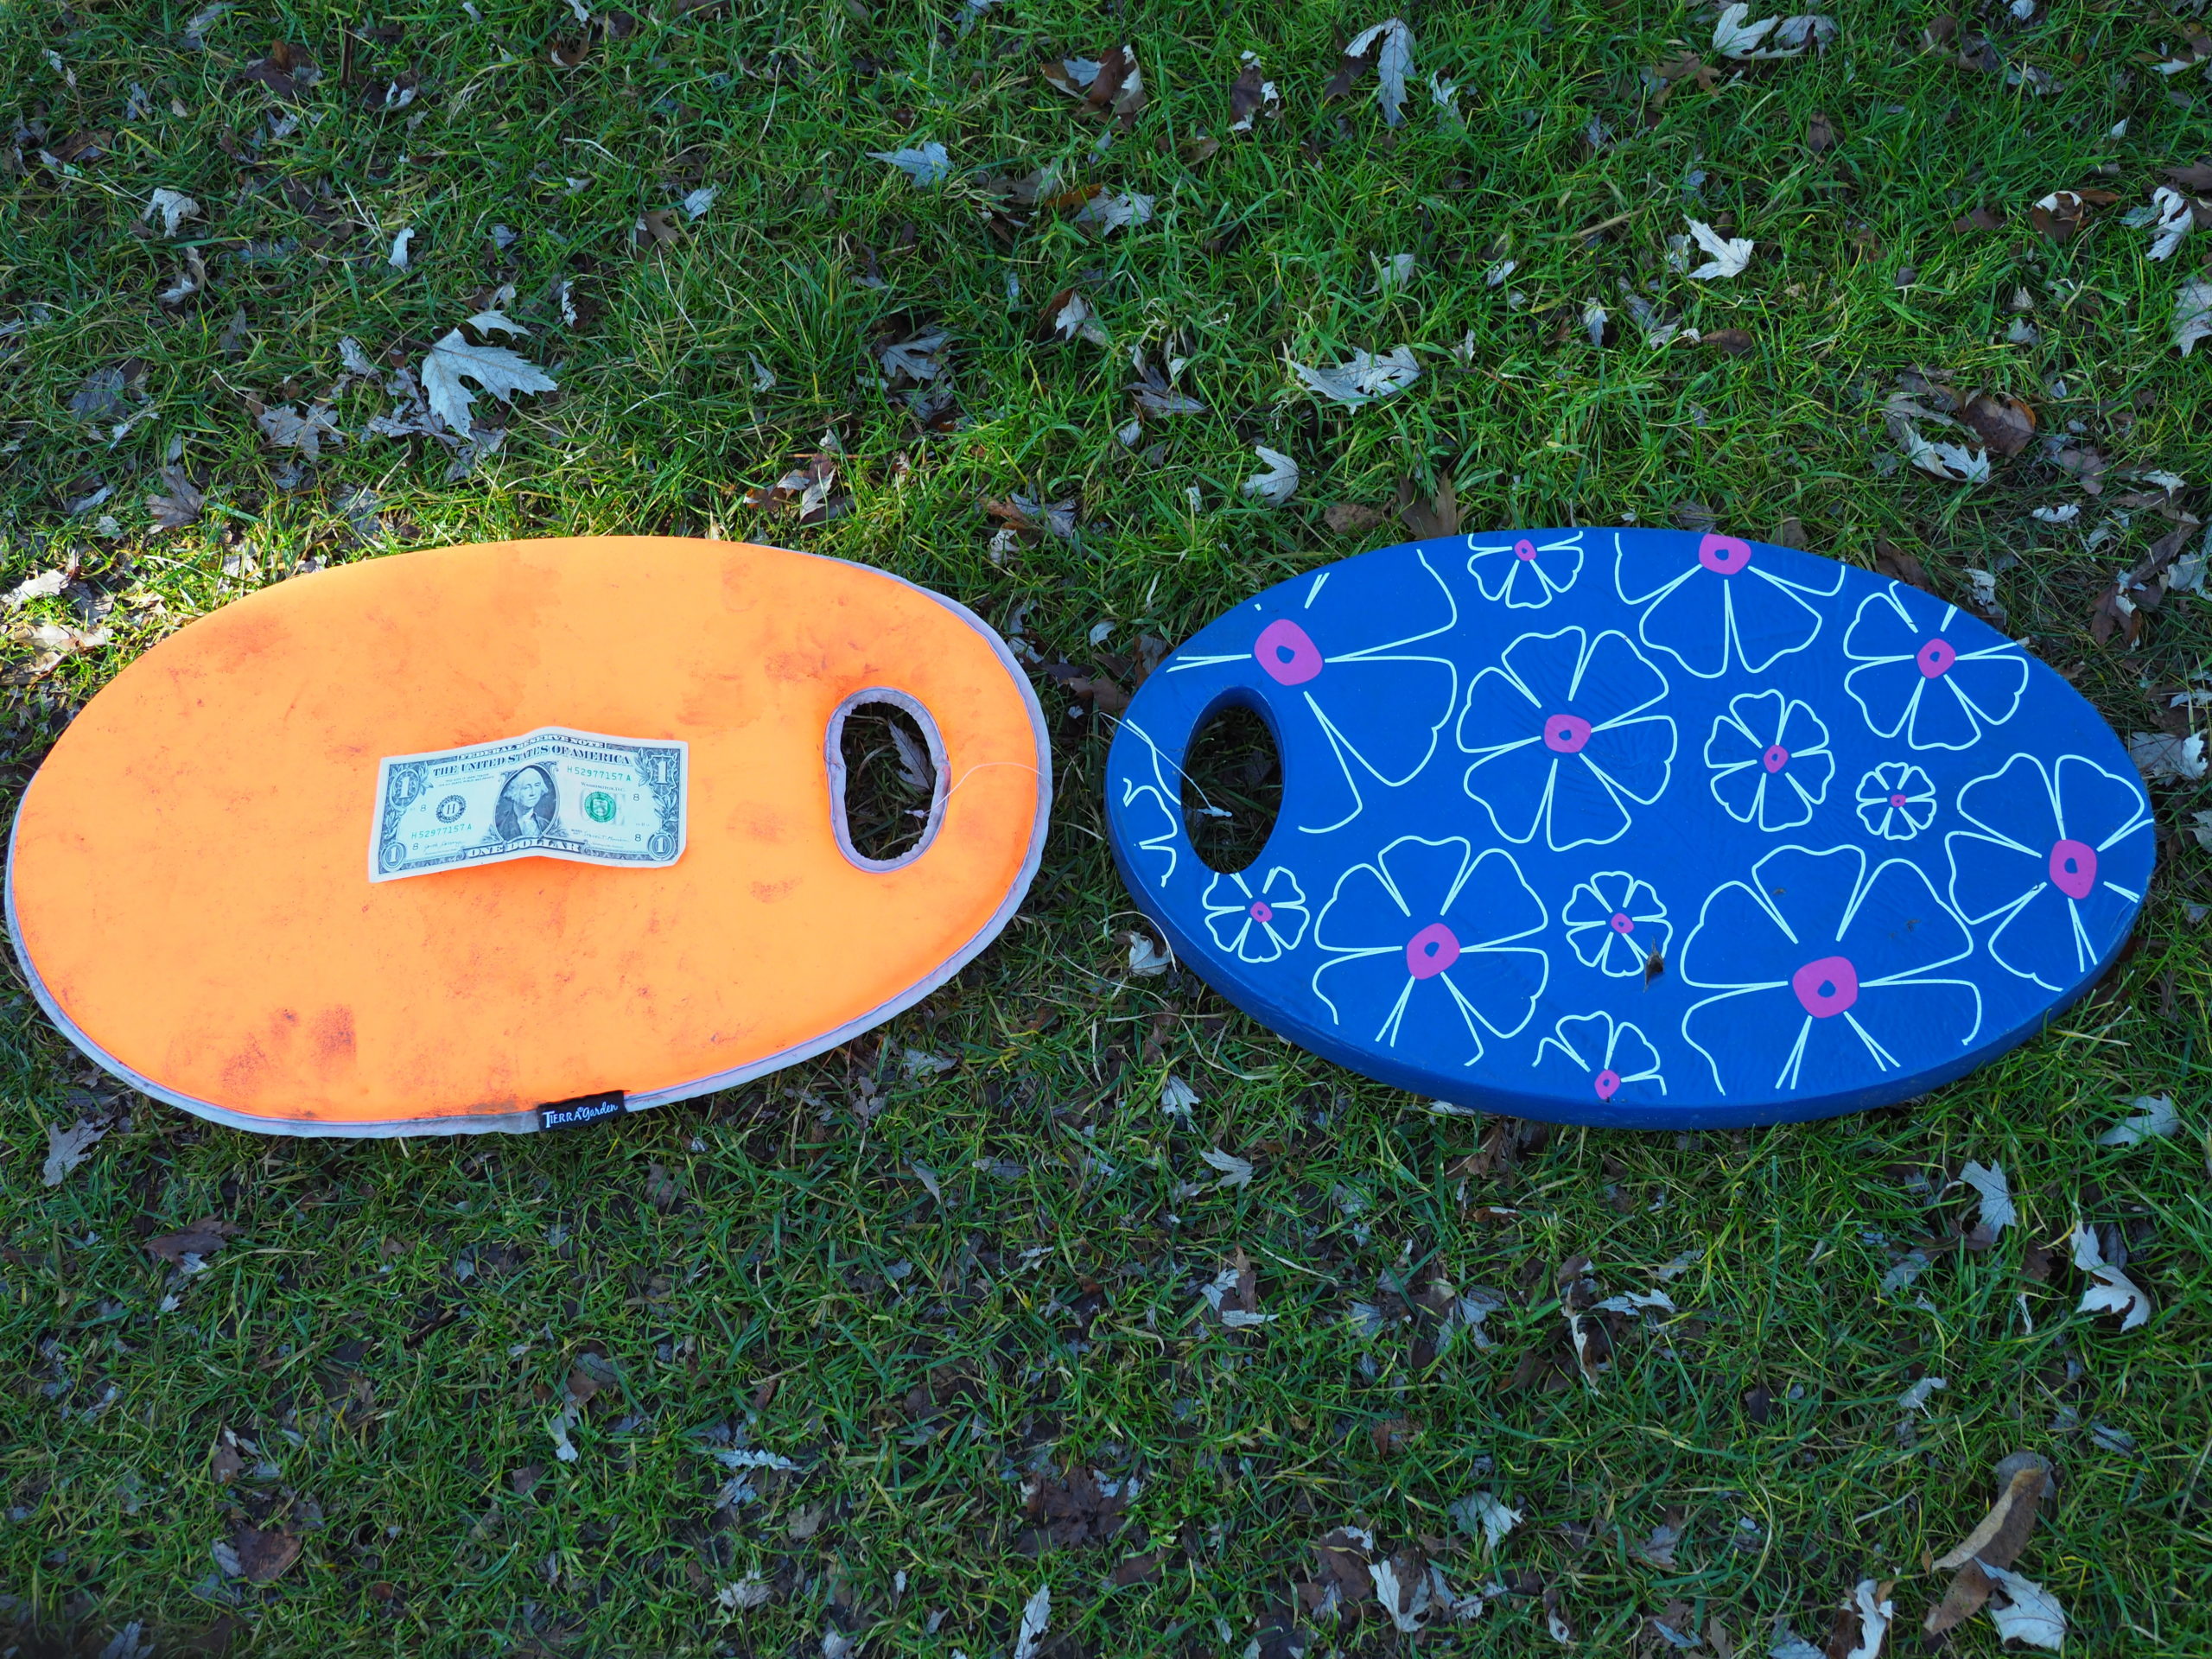 Two different density kneeling pads. The one on the left (dollar bill is for size reference) is soft and spongy and would work on sandy soils and soft areas. The pad on the right is a medium firm one and well suited for all uses and knees.